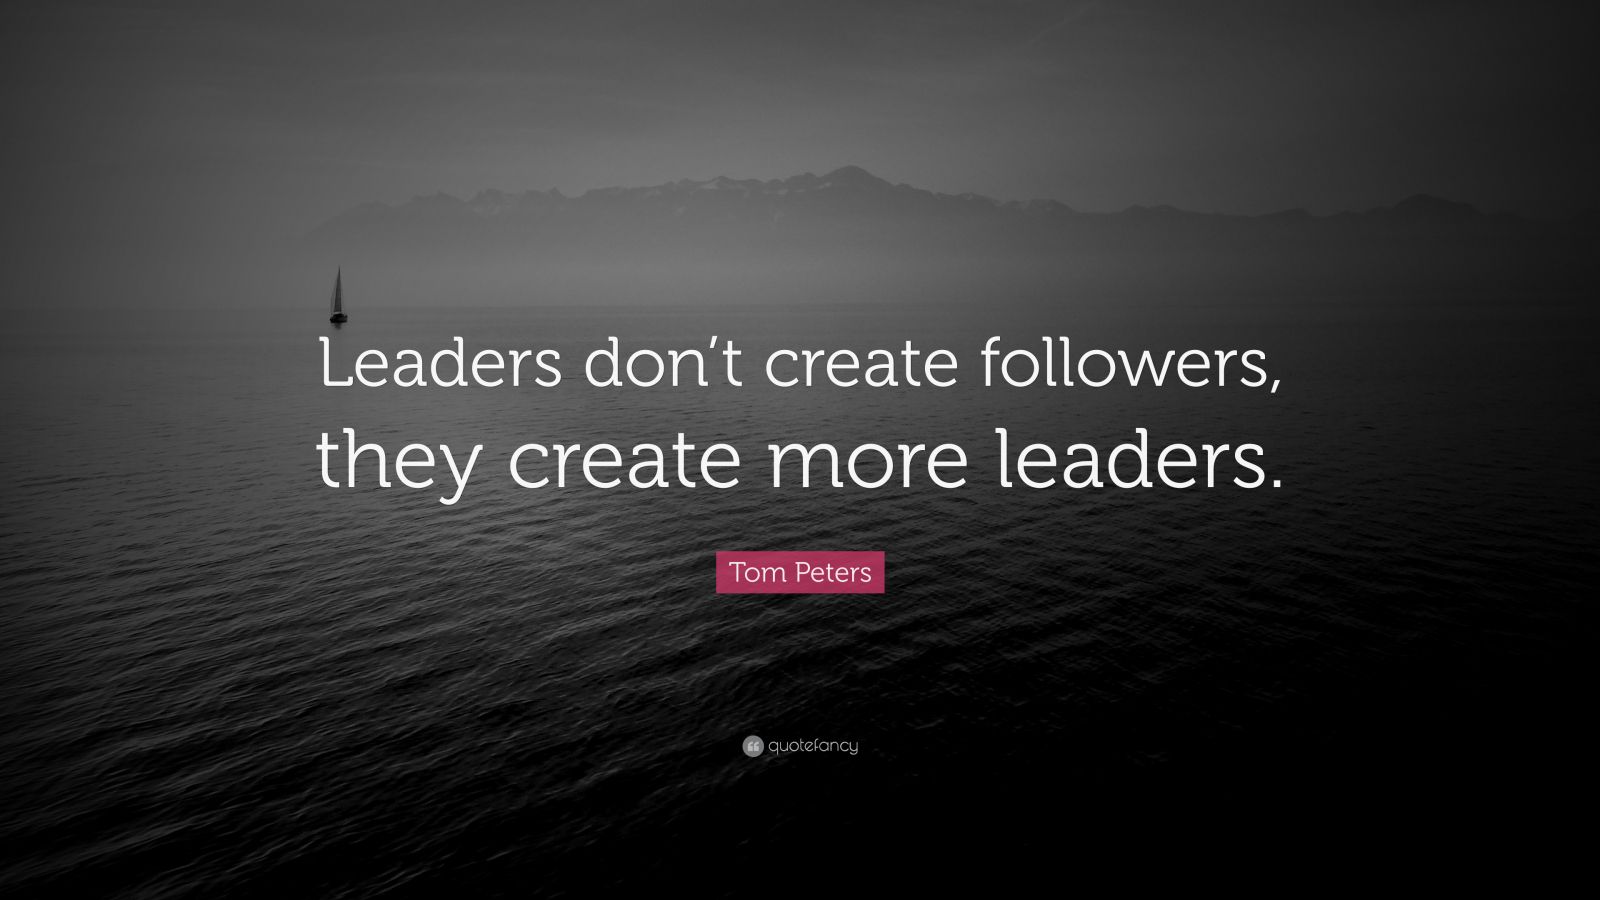 Tom Peters Quote: “Leaders don’t create followers, they create more